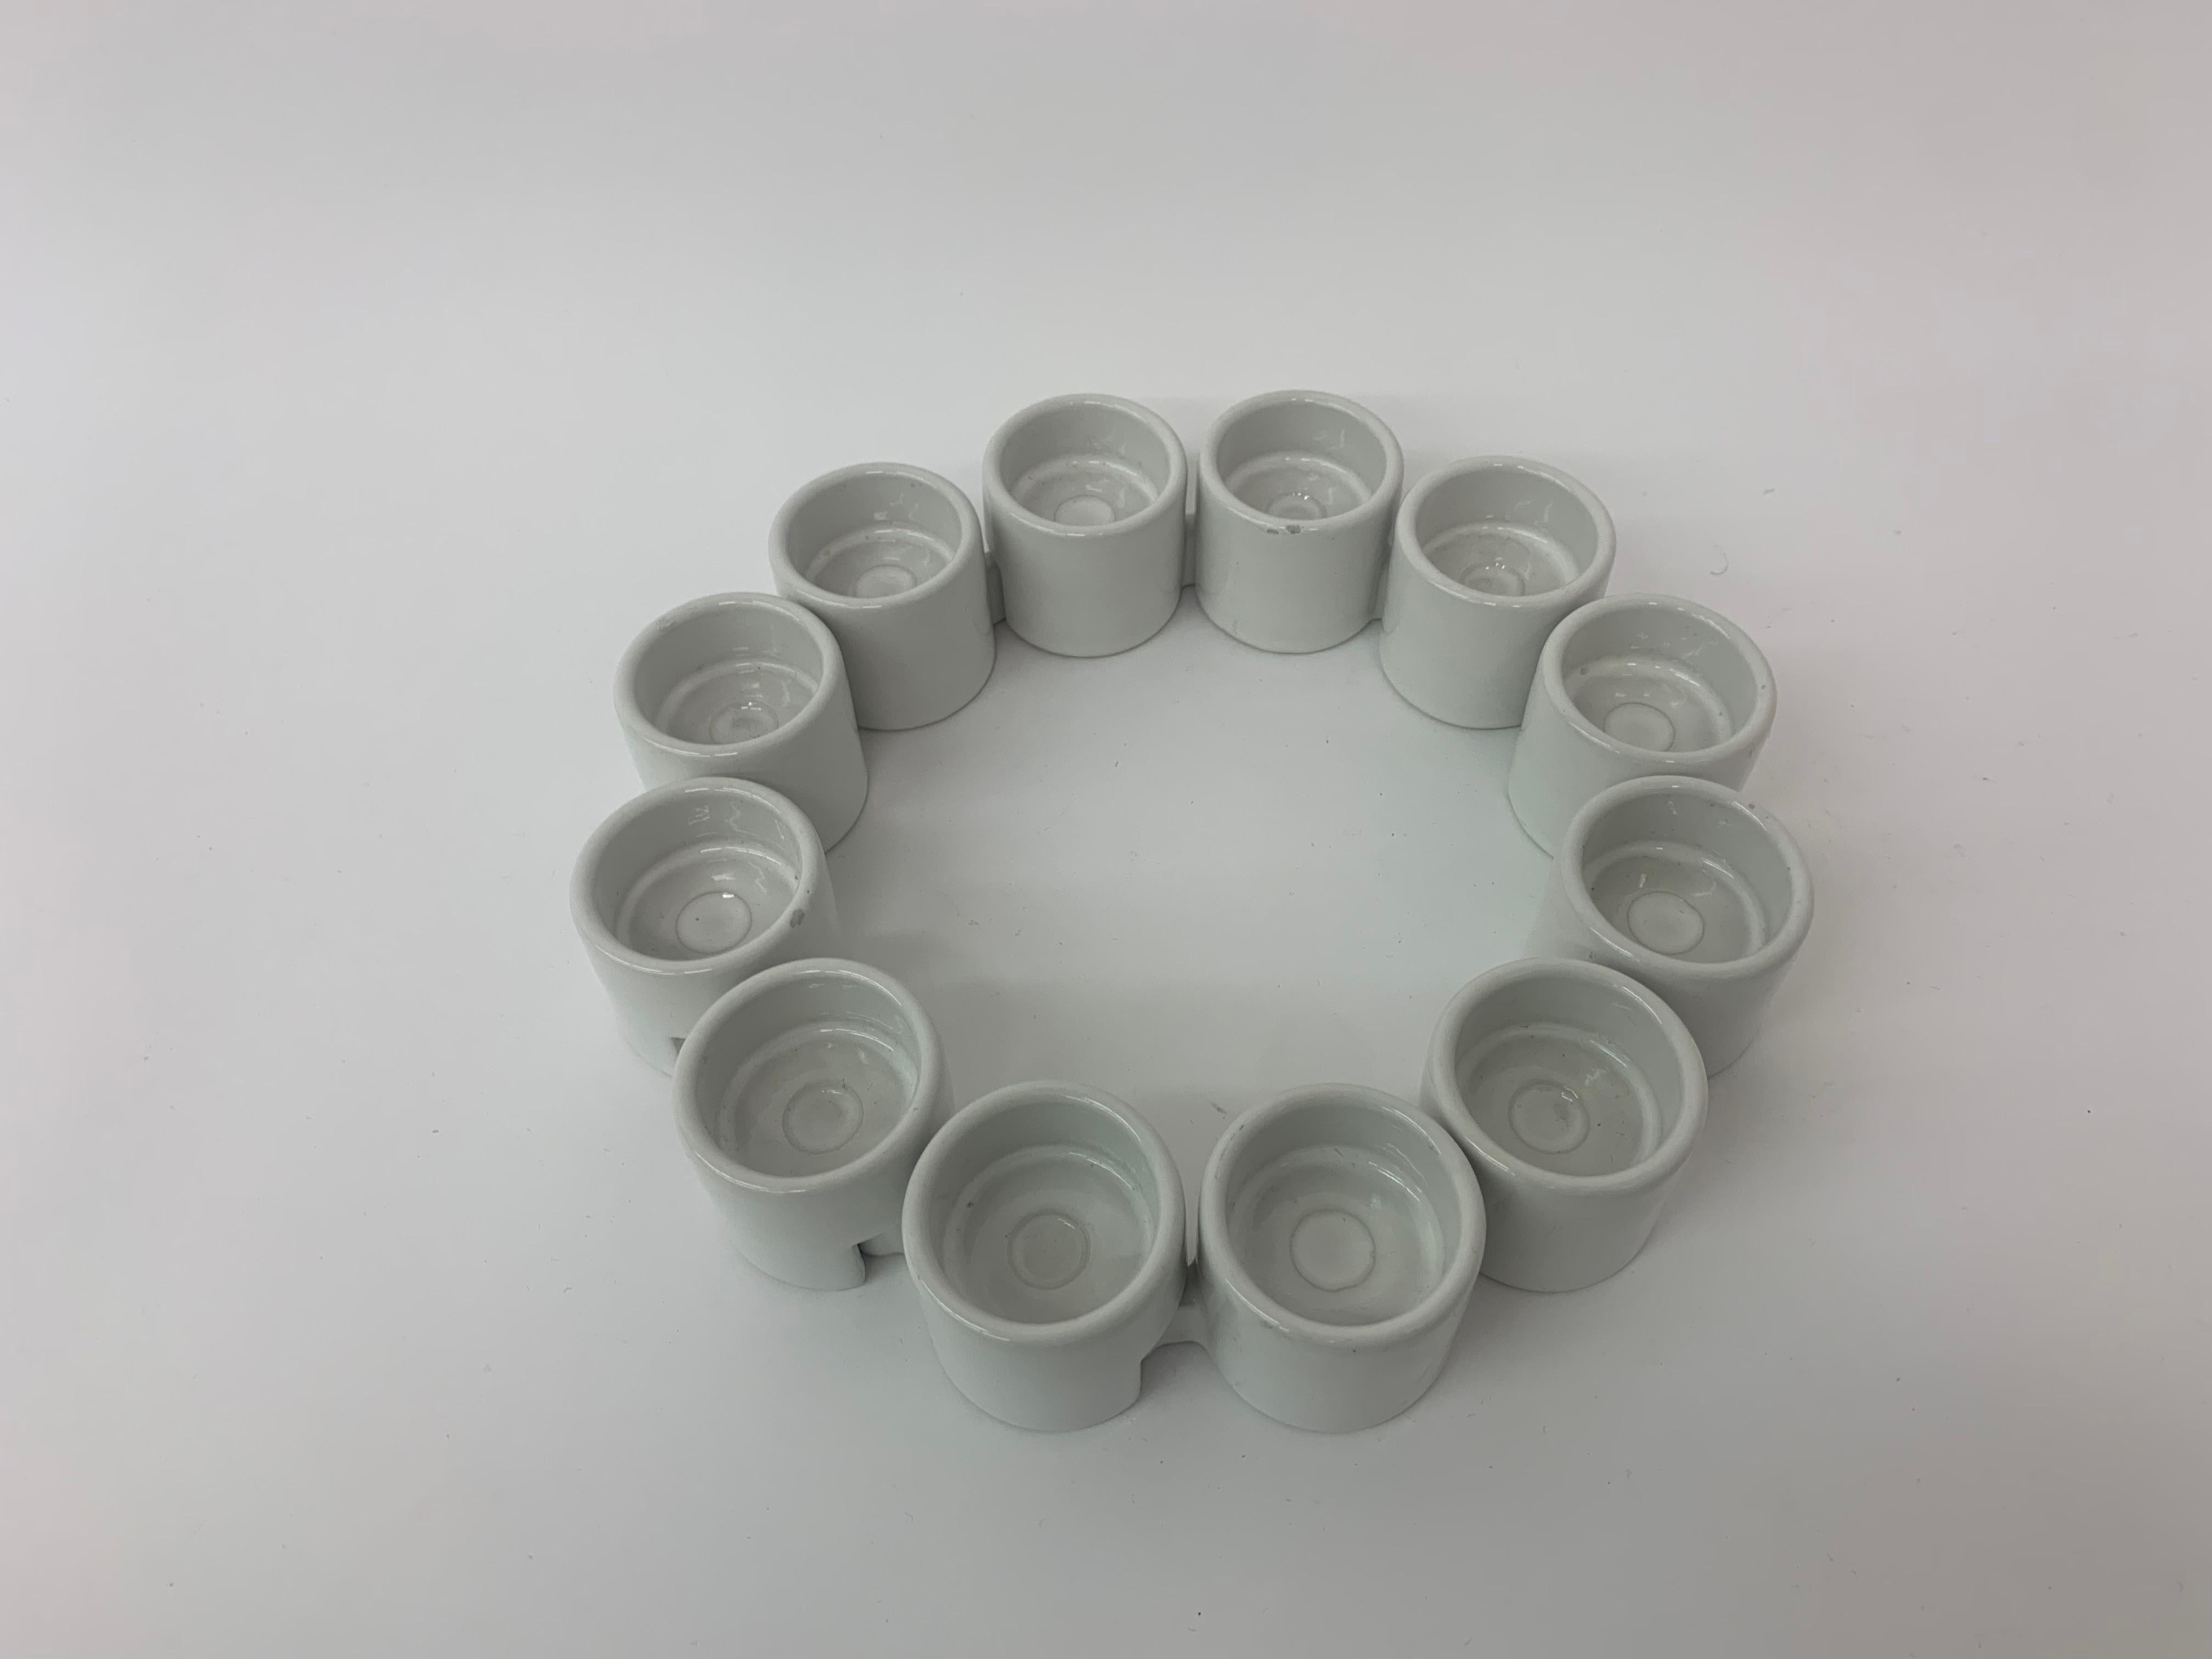 Vintage Ikea Candle Holder by Ehlen Johansson, 1980's For Sale 2